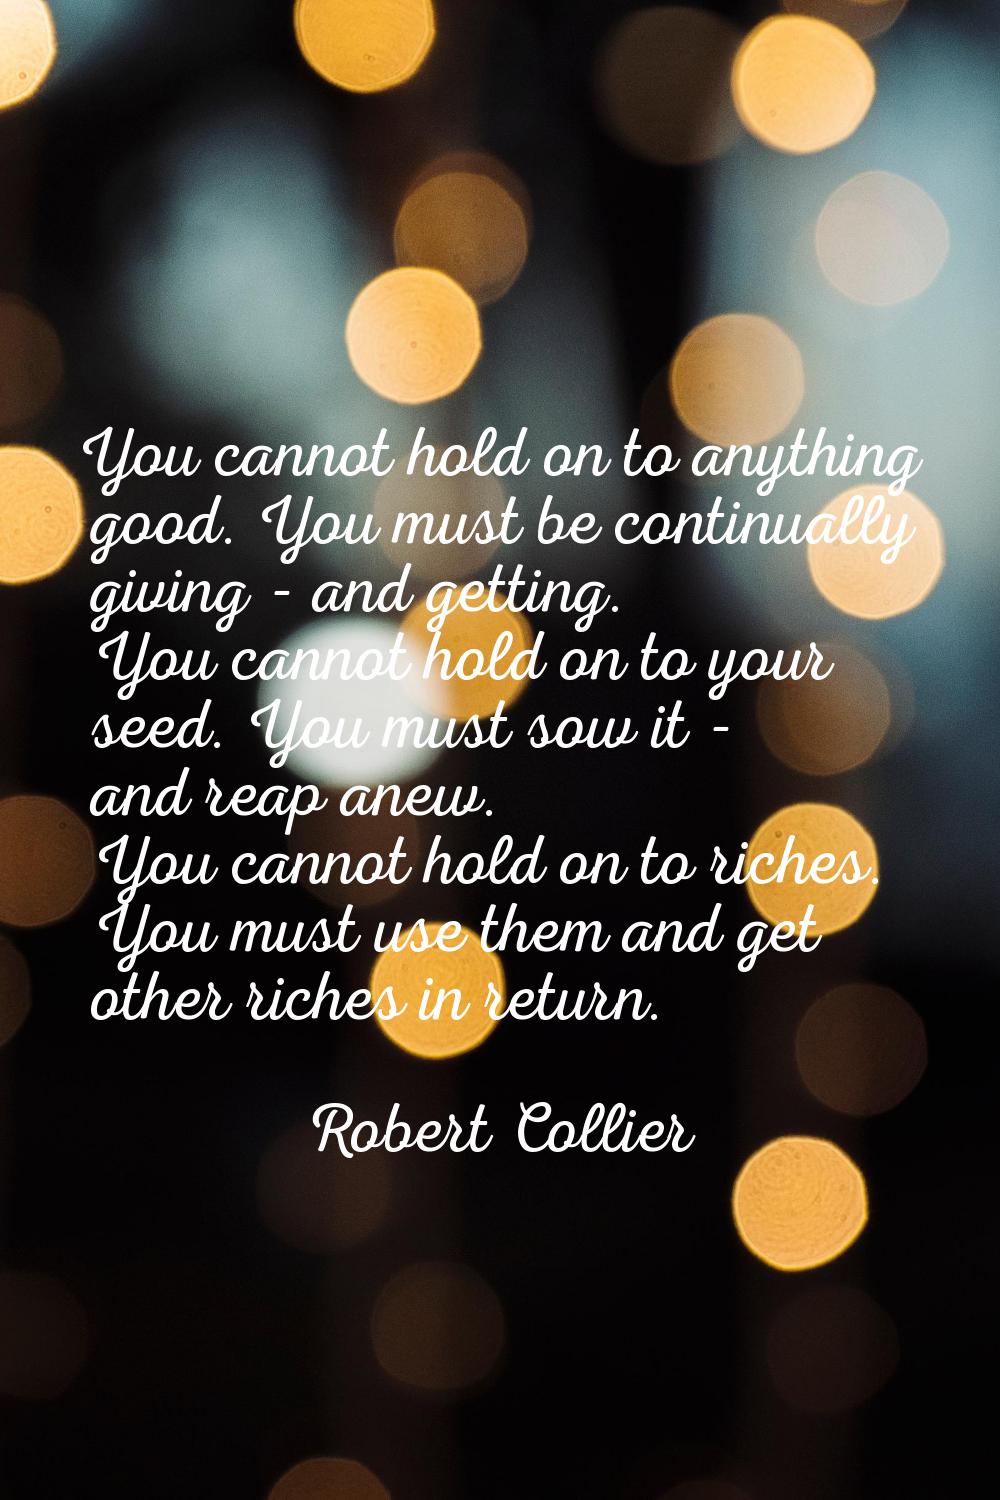 You cannot hold on to anything good. You must be continually giving - and getting. You cannot hold 